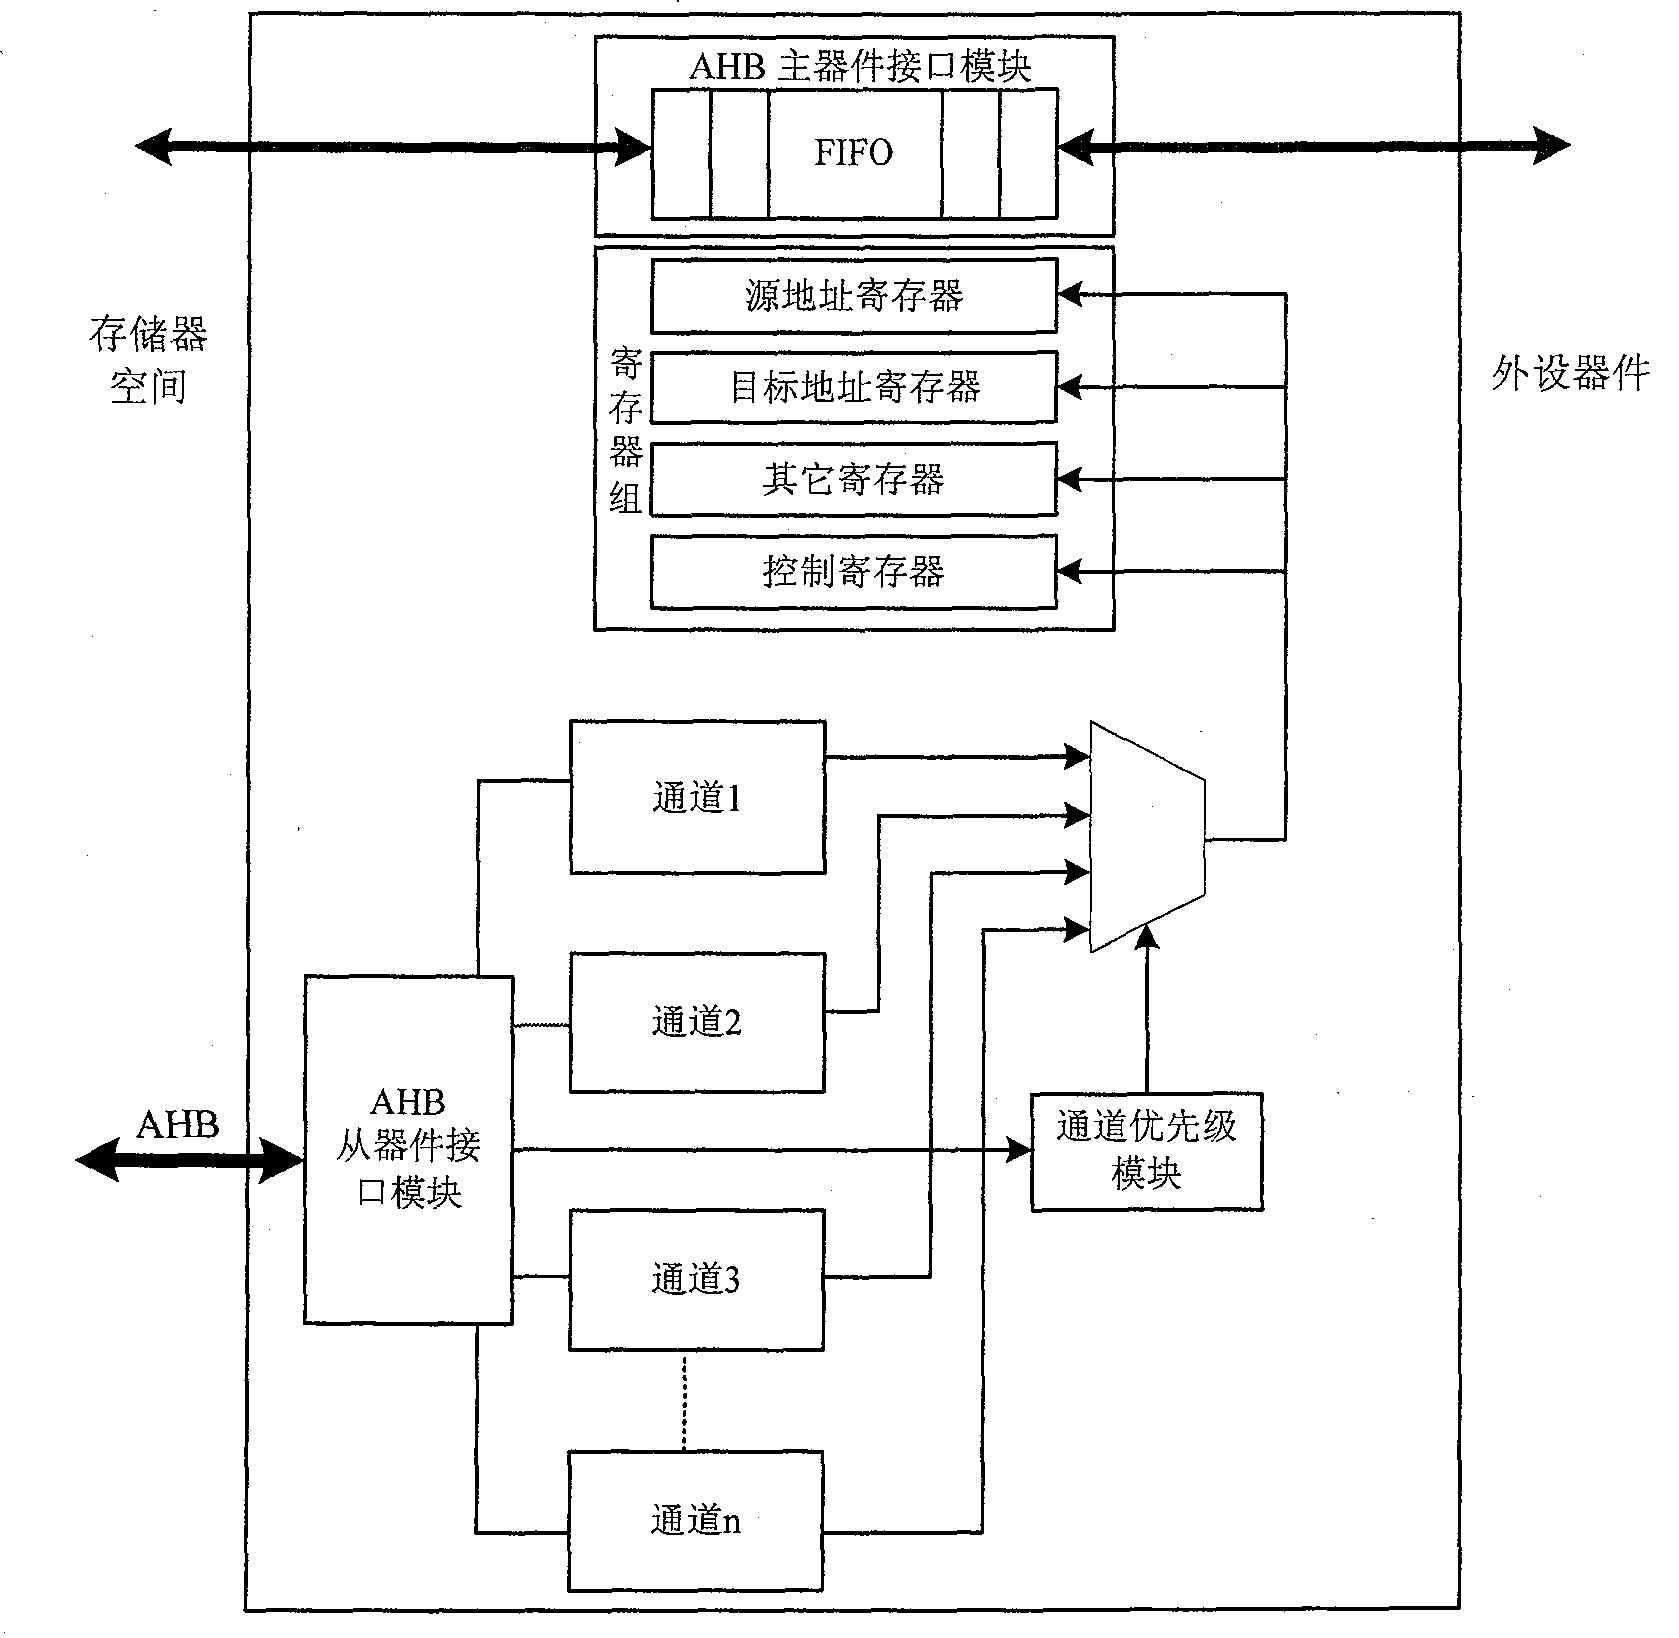 Method for implementing two-dimensional data delivery using DMA controller